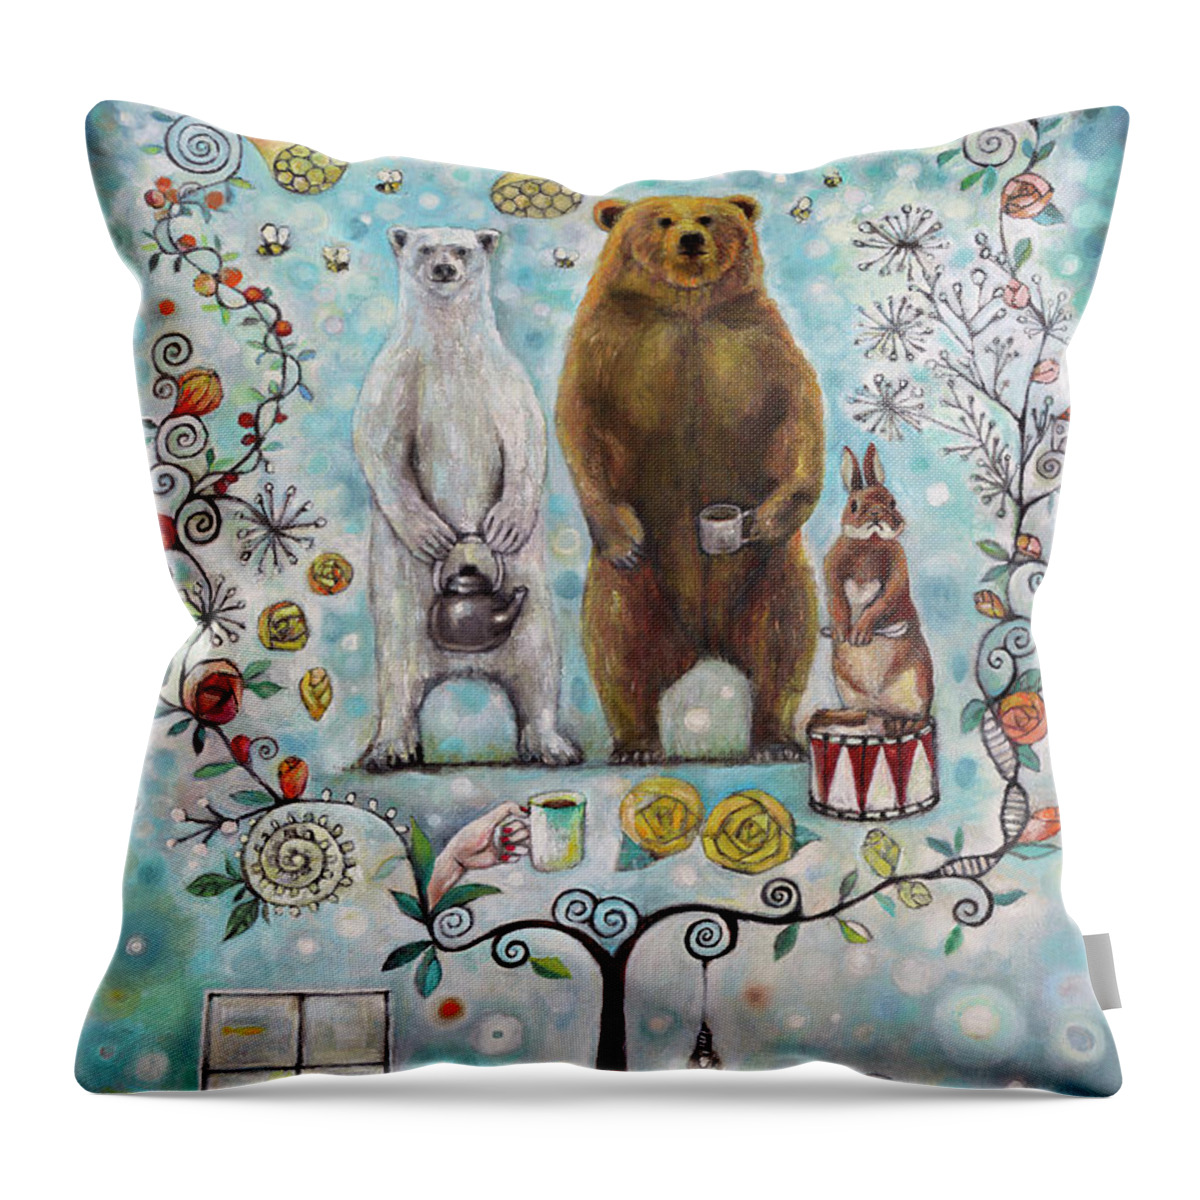 Bear Throw Pillow featuring the painting Inside Story by Manami Lingerfelt